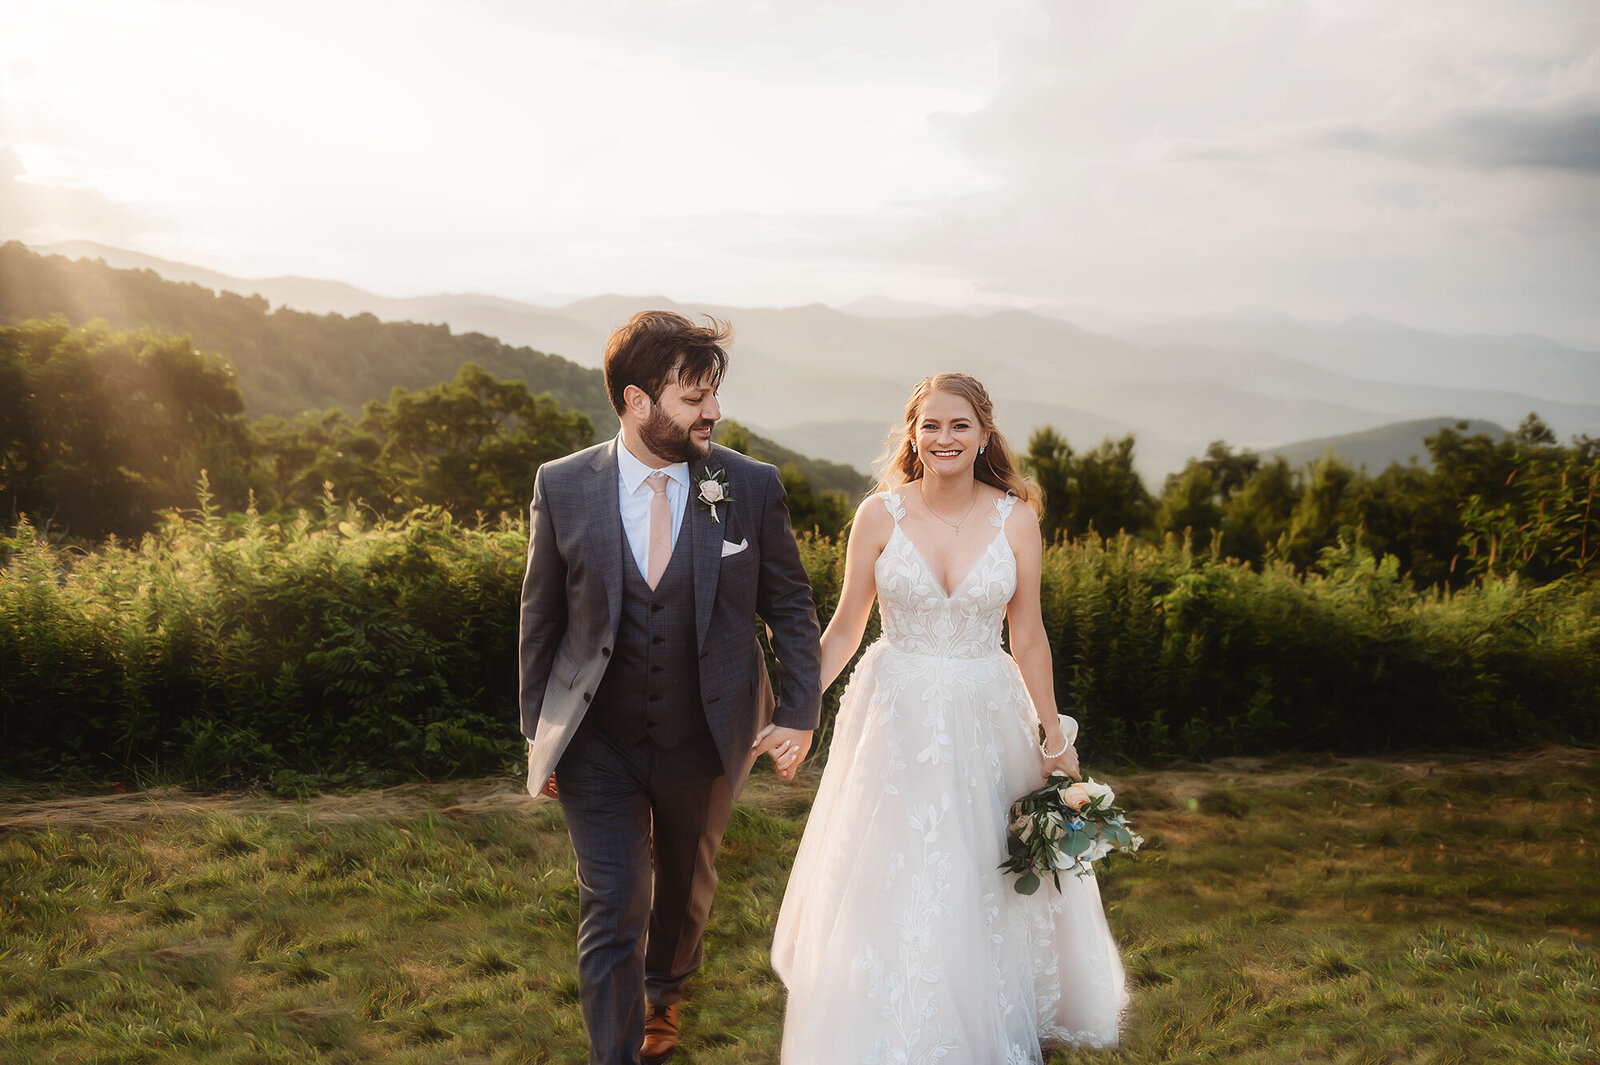 Bride and Groom walk hand in hand during their Elopement on the Blue Ridge Parkway in Asheville, NC.